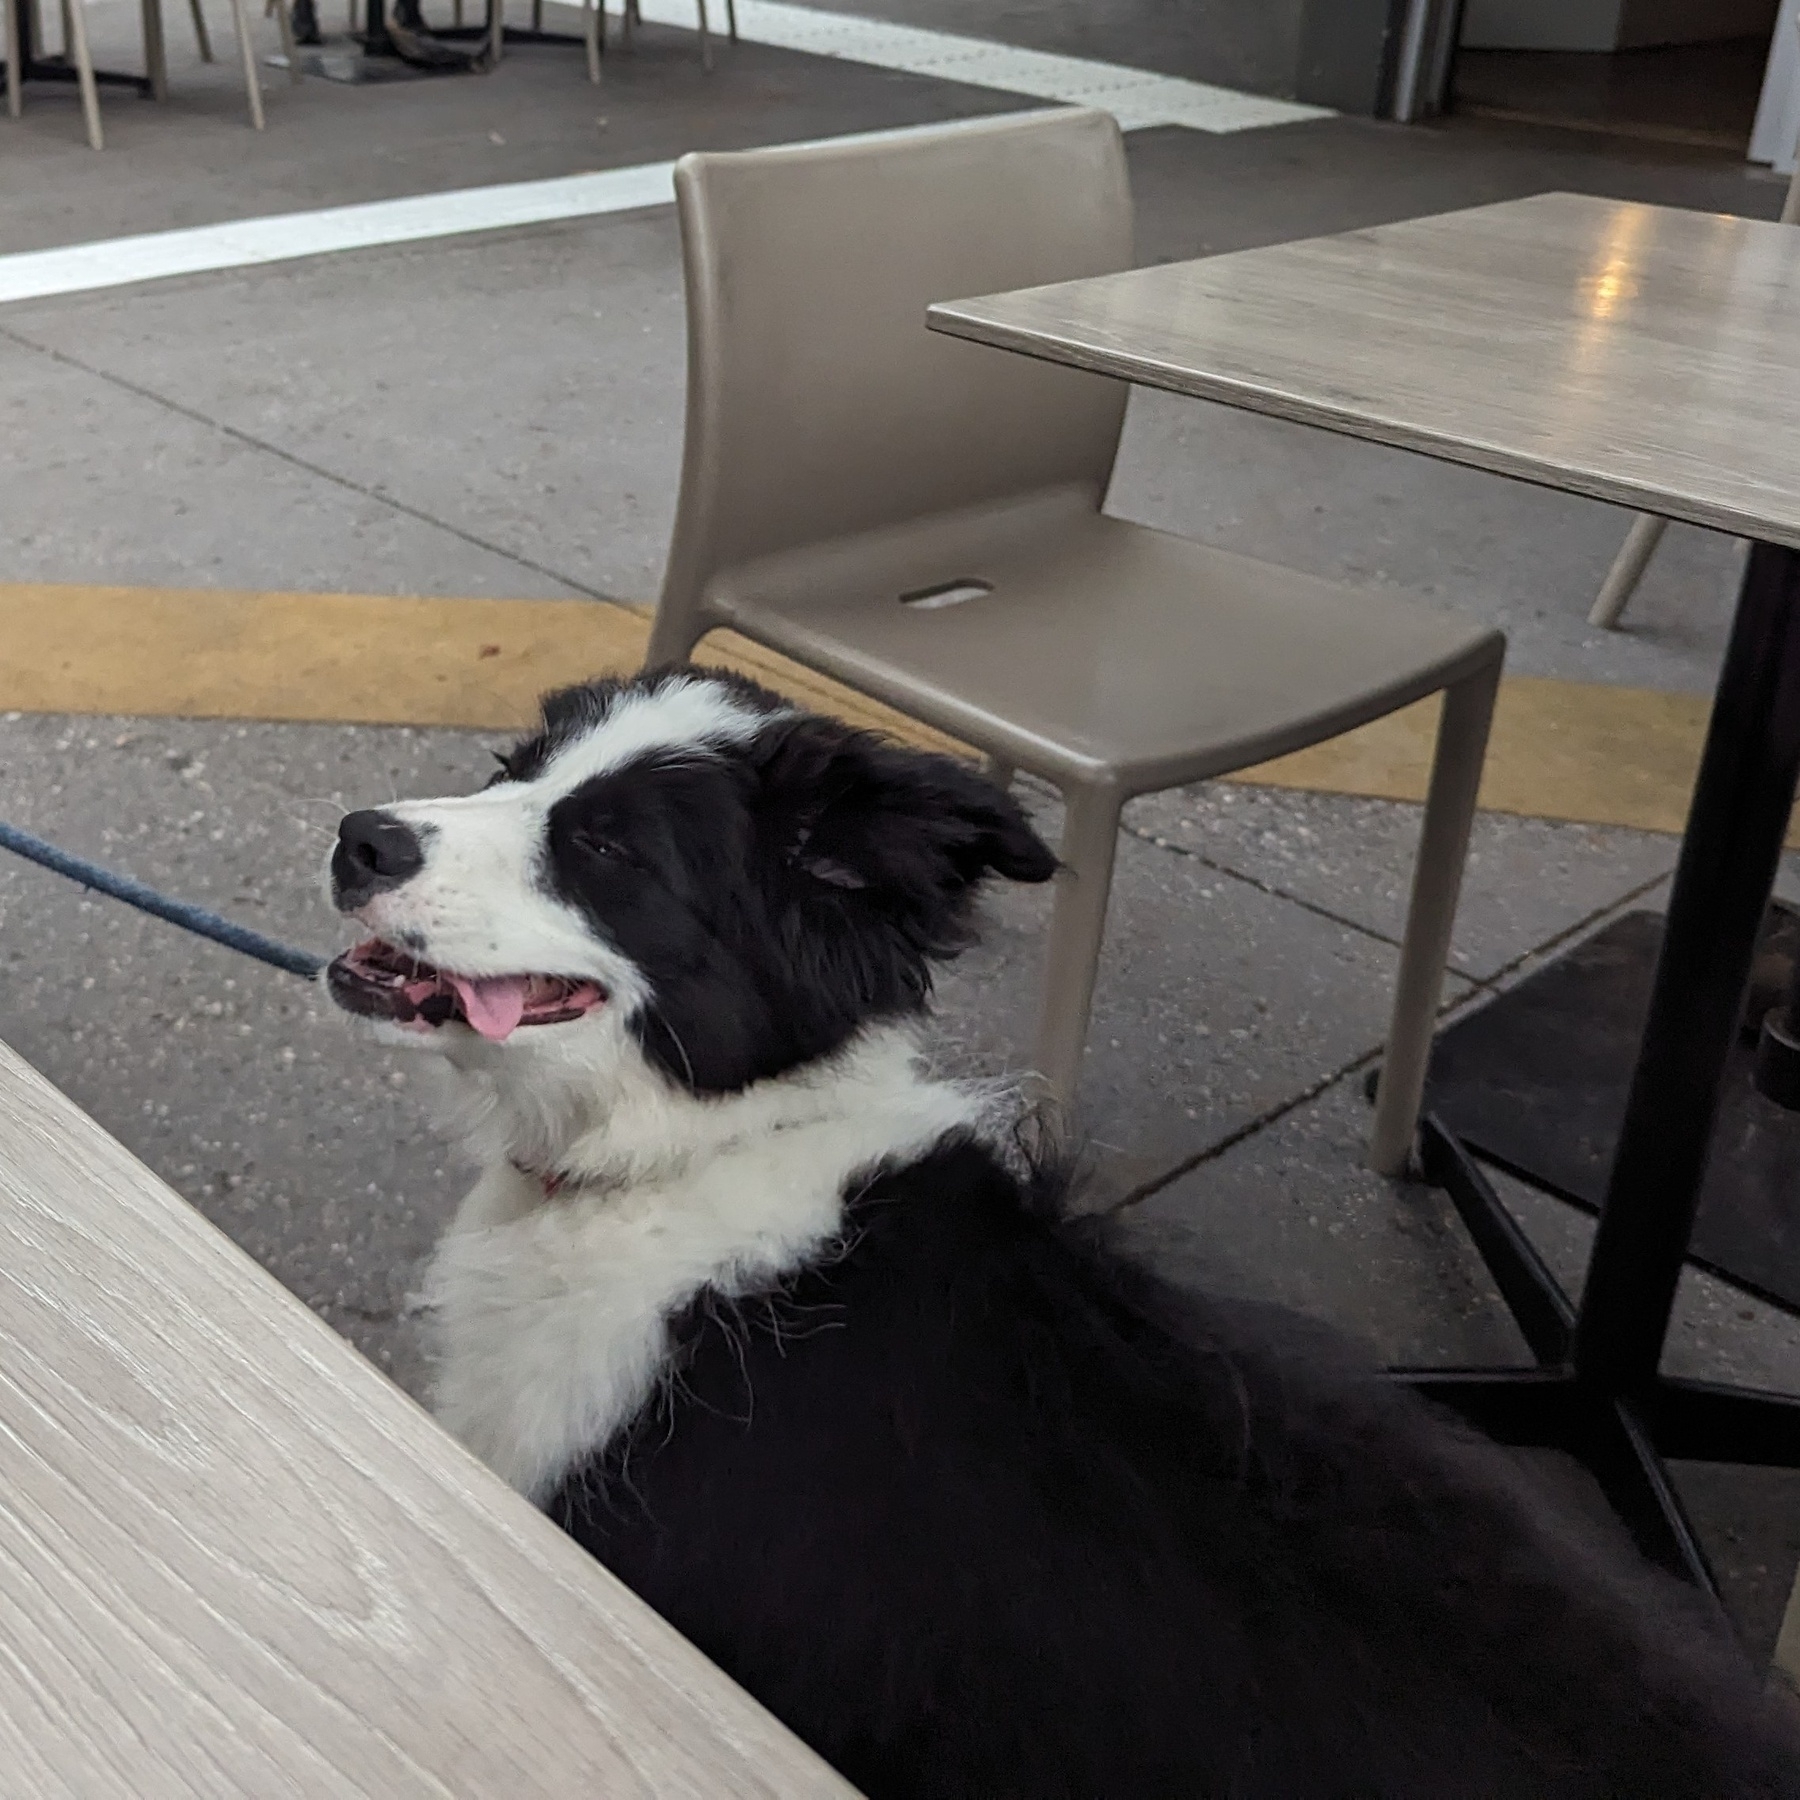 A border collie with her tongue out next to a table at an outdoor seating area.